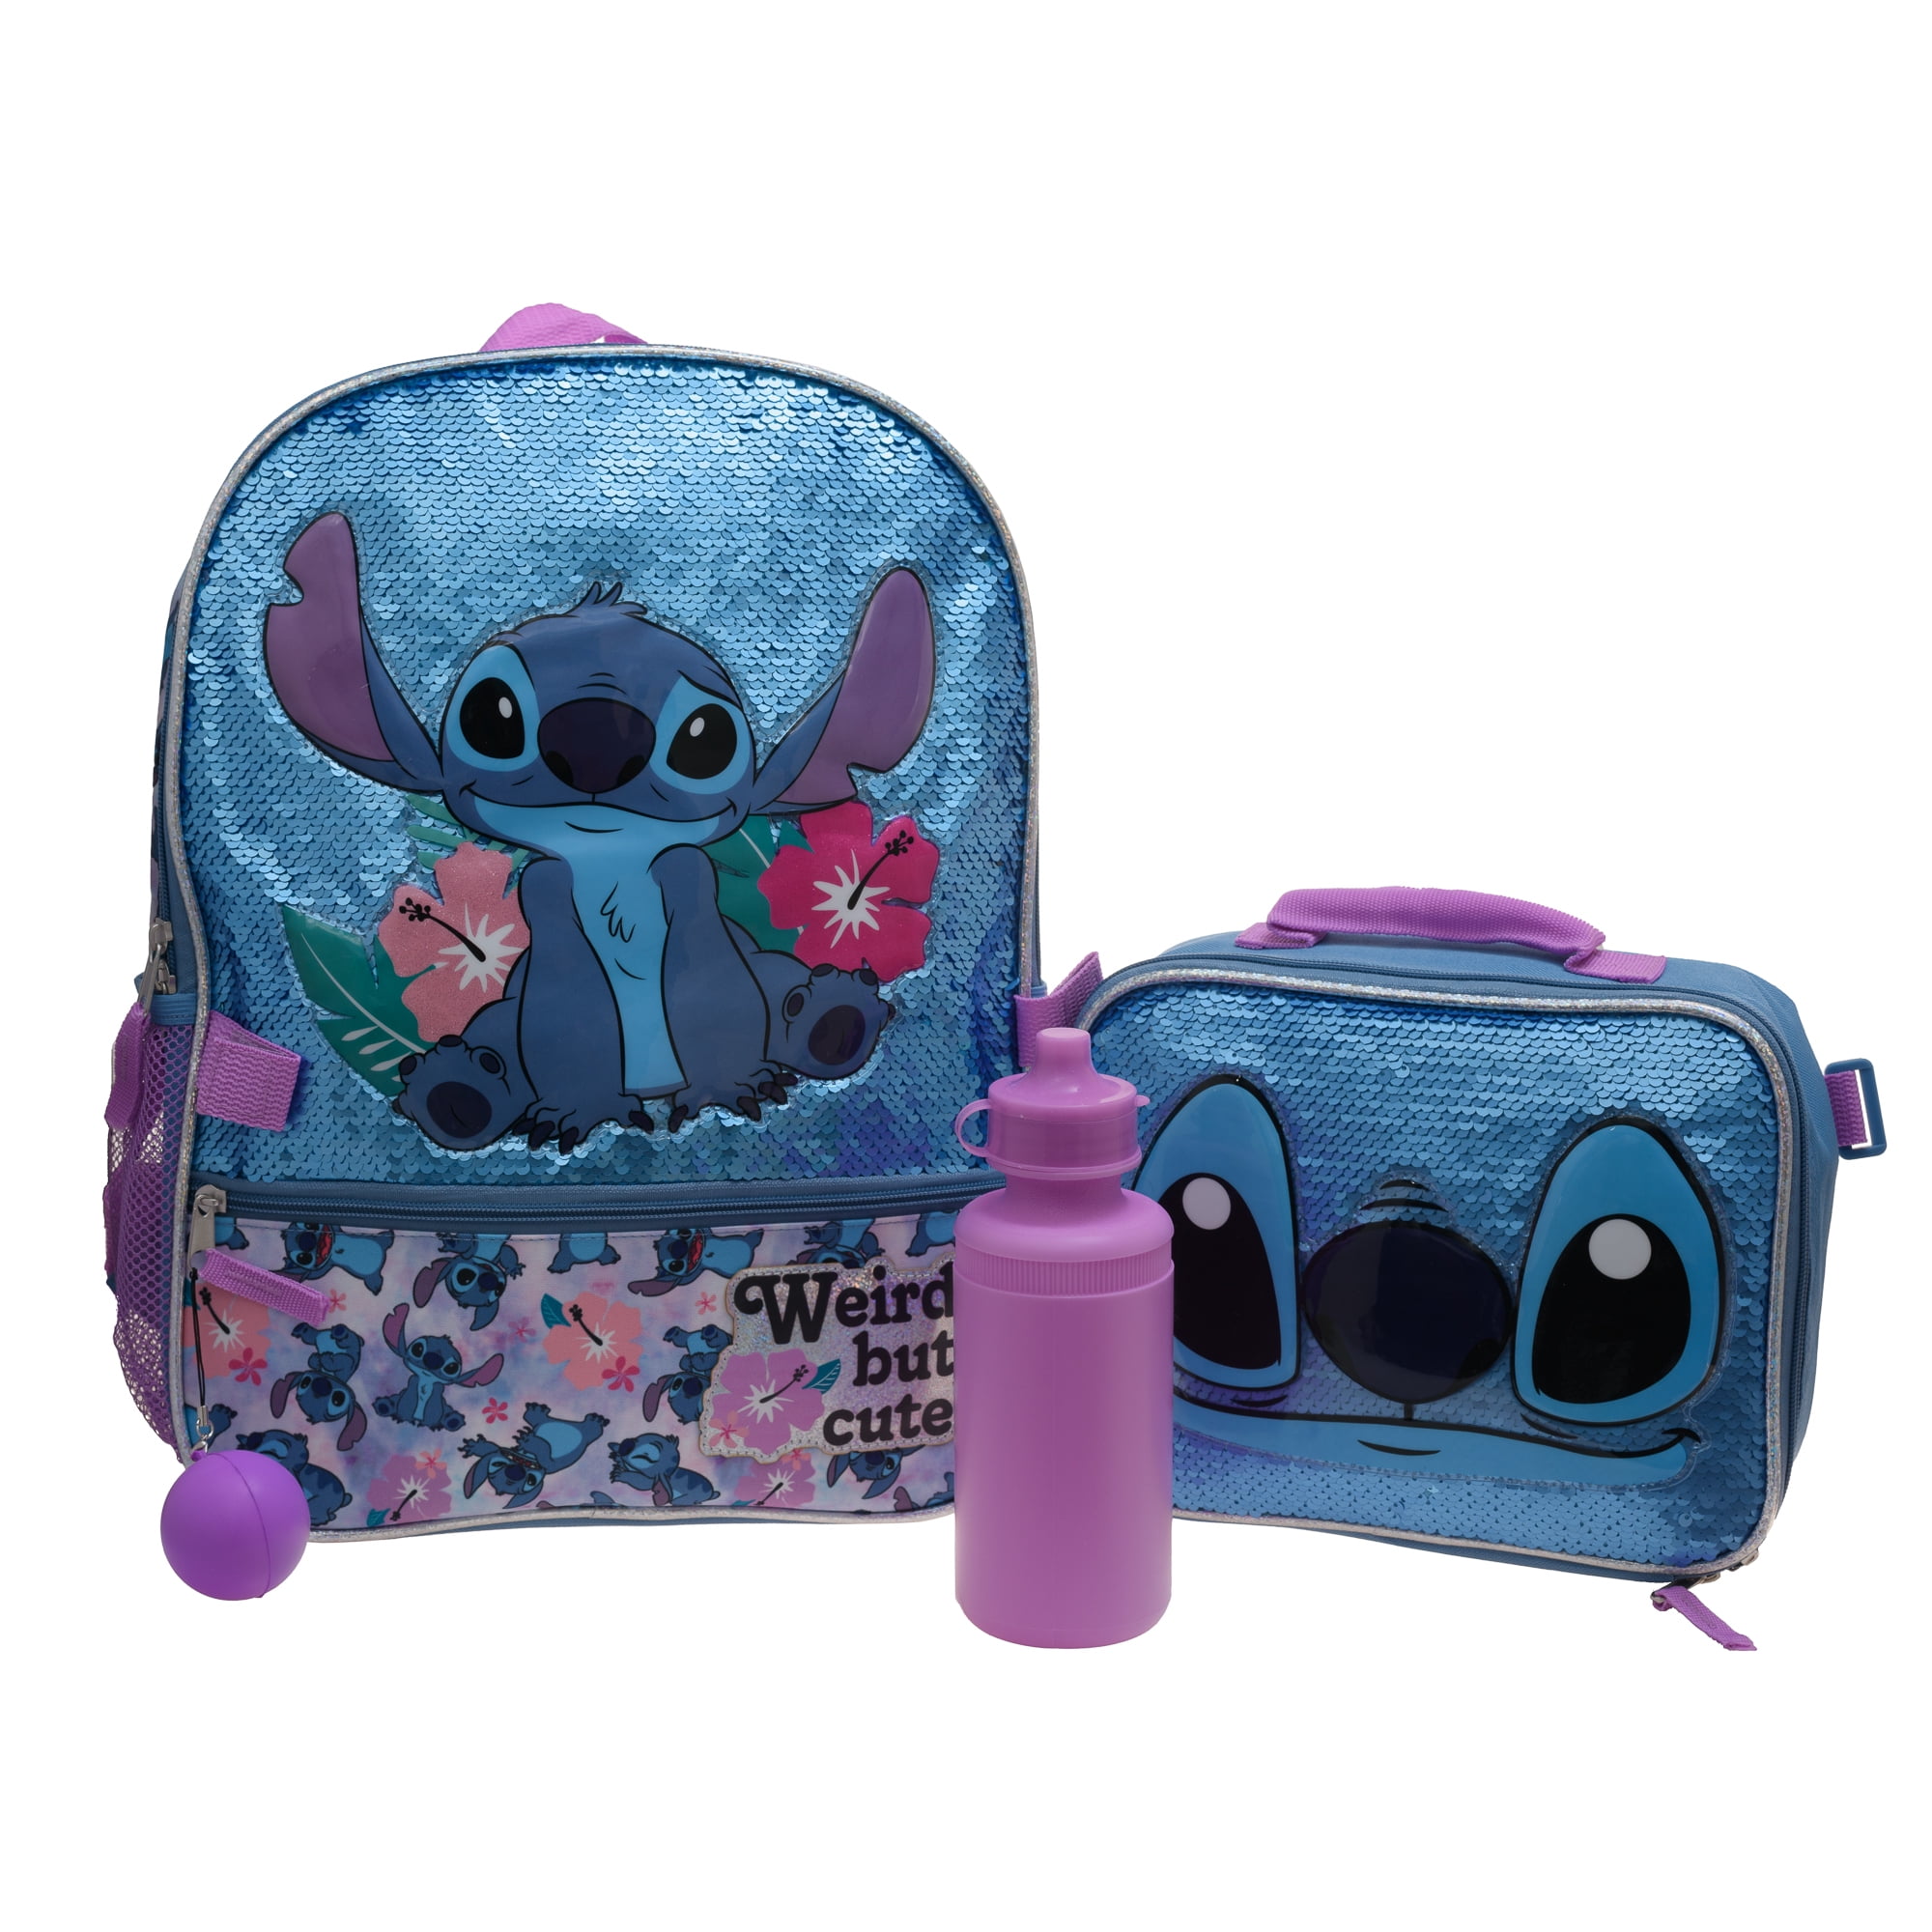 Disney Backpacks and Lunch Boxes Are On Sale NOW! 